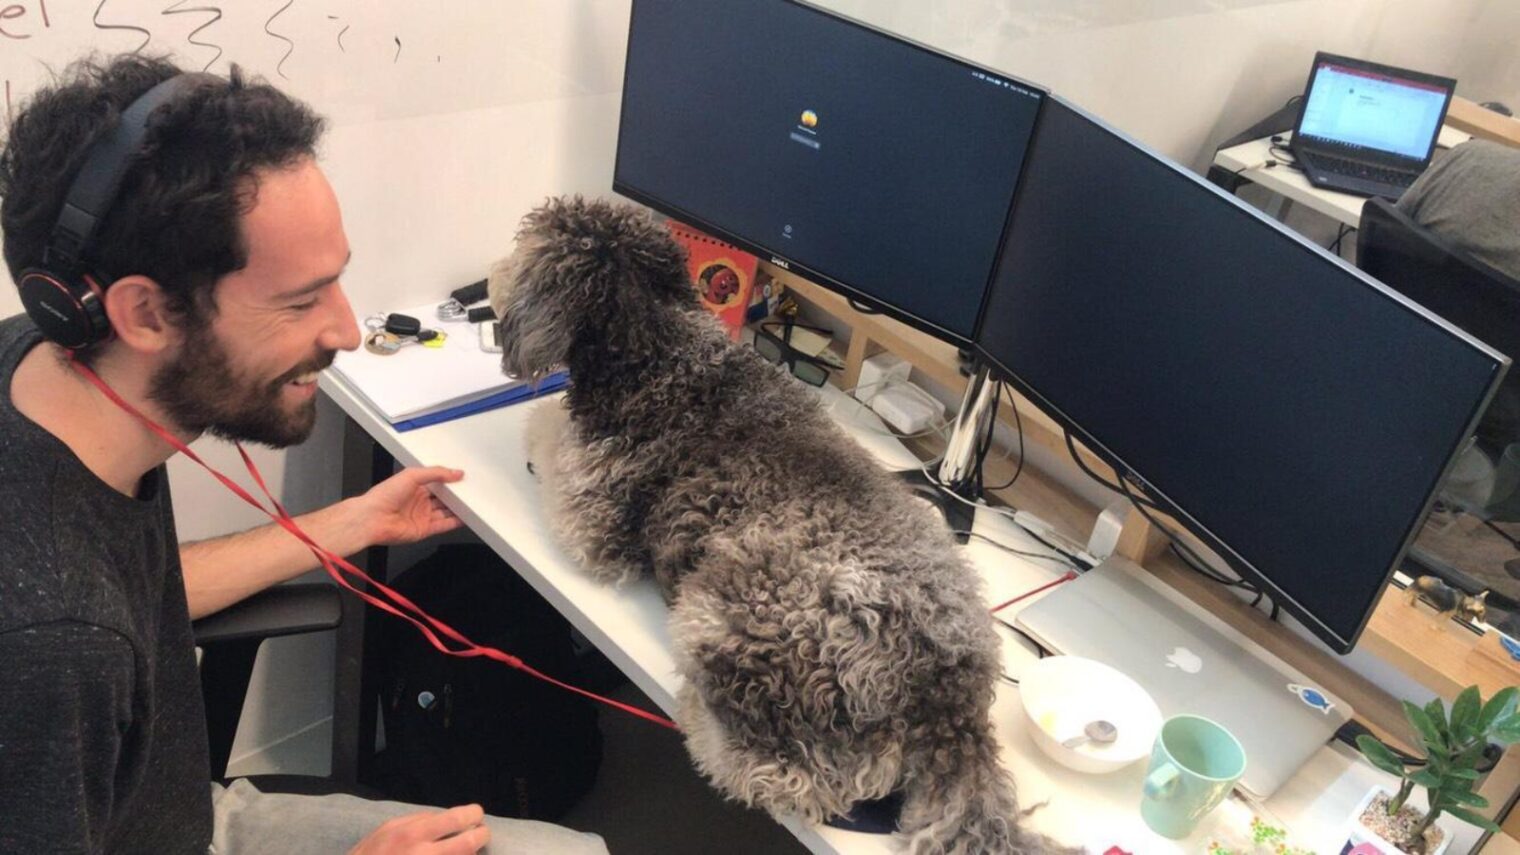 Just another day at the Yotpo office for Mona. Photo: courtesy